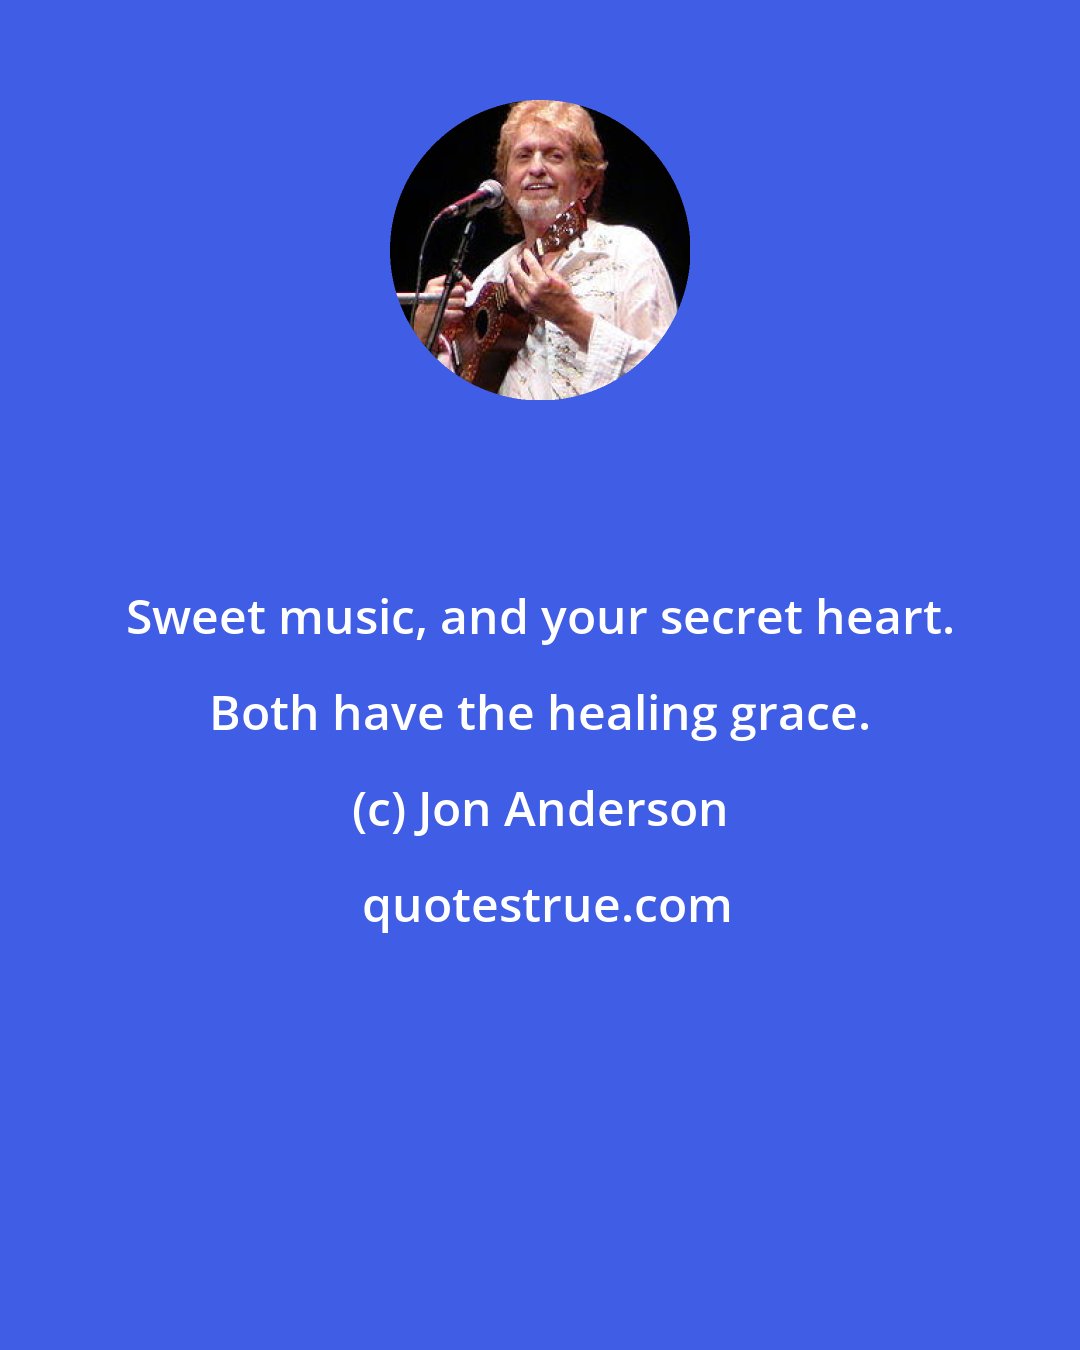 Jon Anderson: Sweet music, and your secret heart. Both have the healing grace.